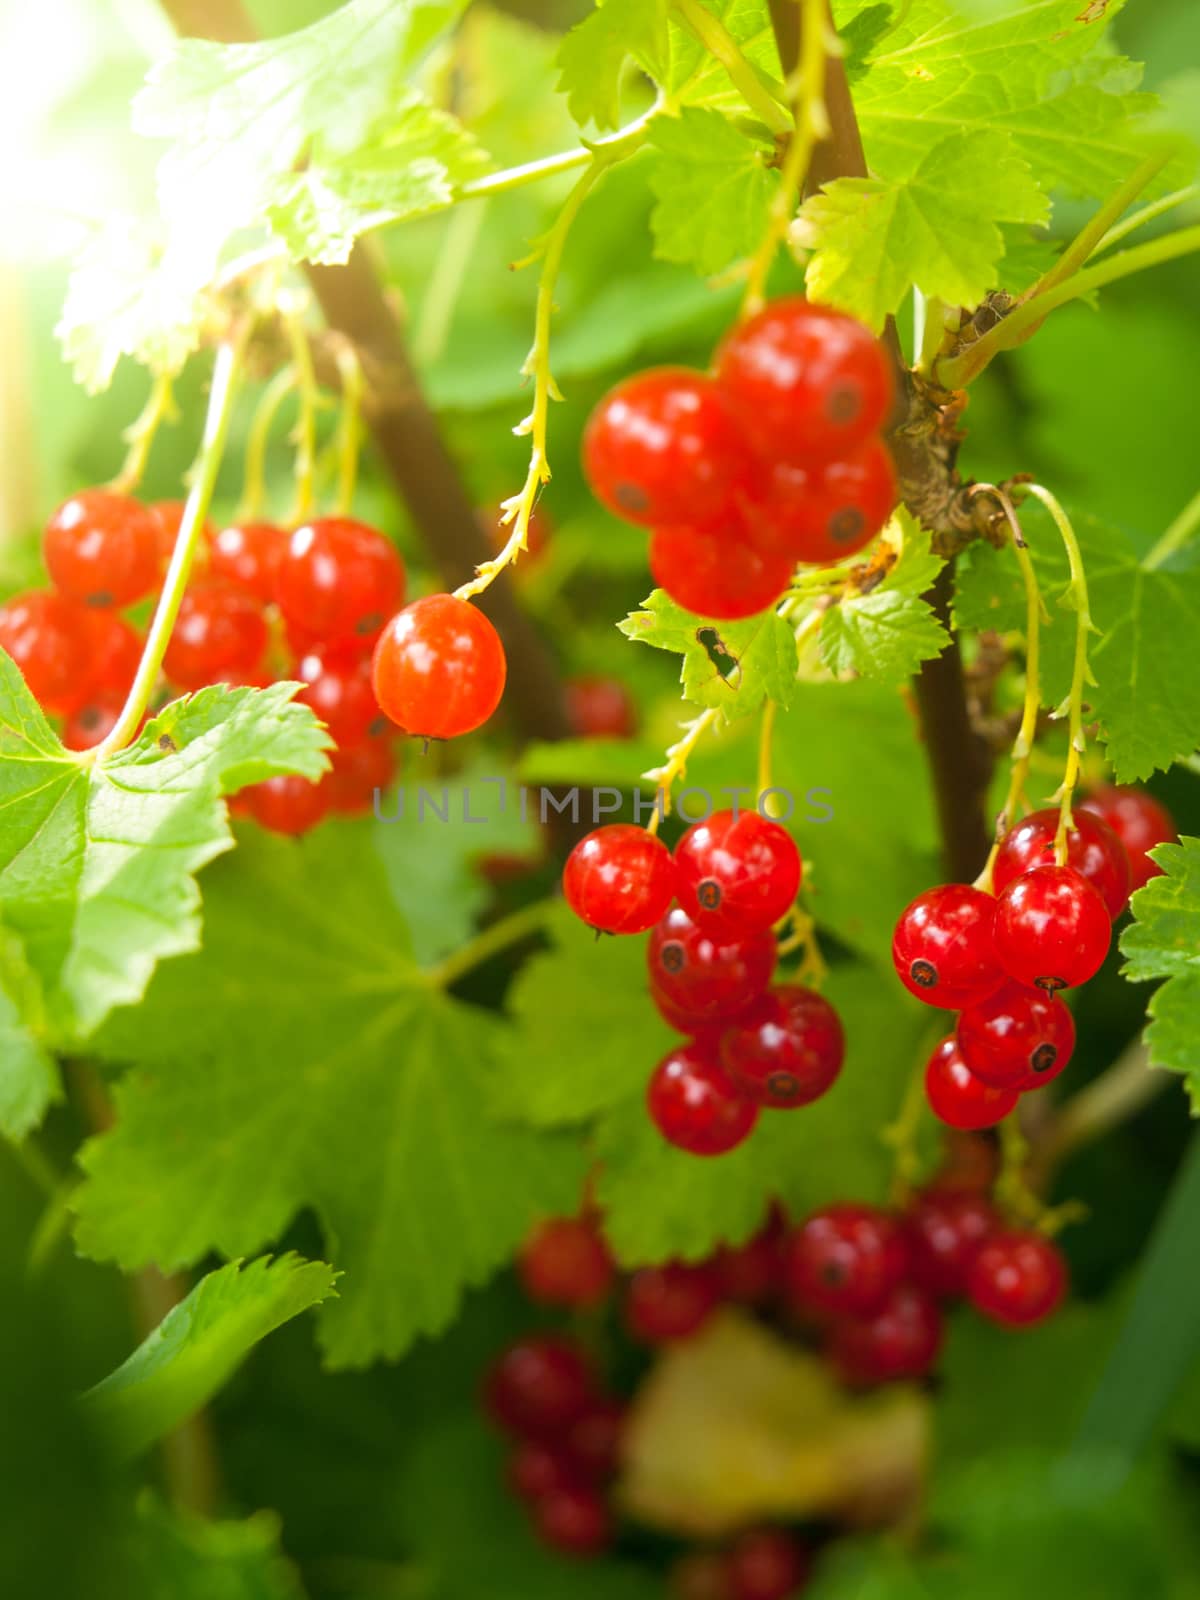 Red currant berries on the branch. Summer garden ripenning crop.